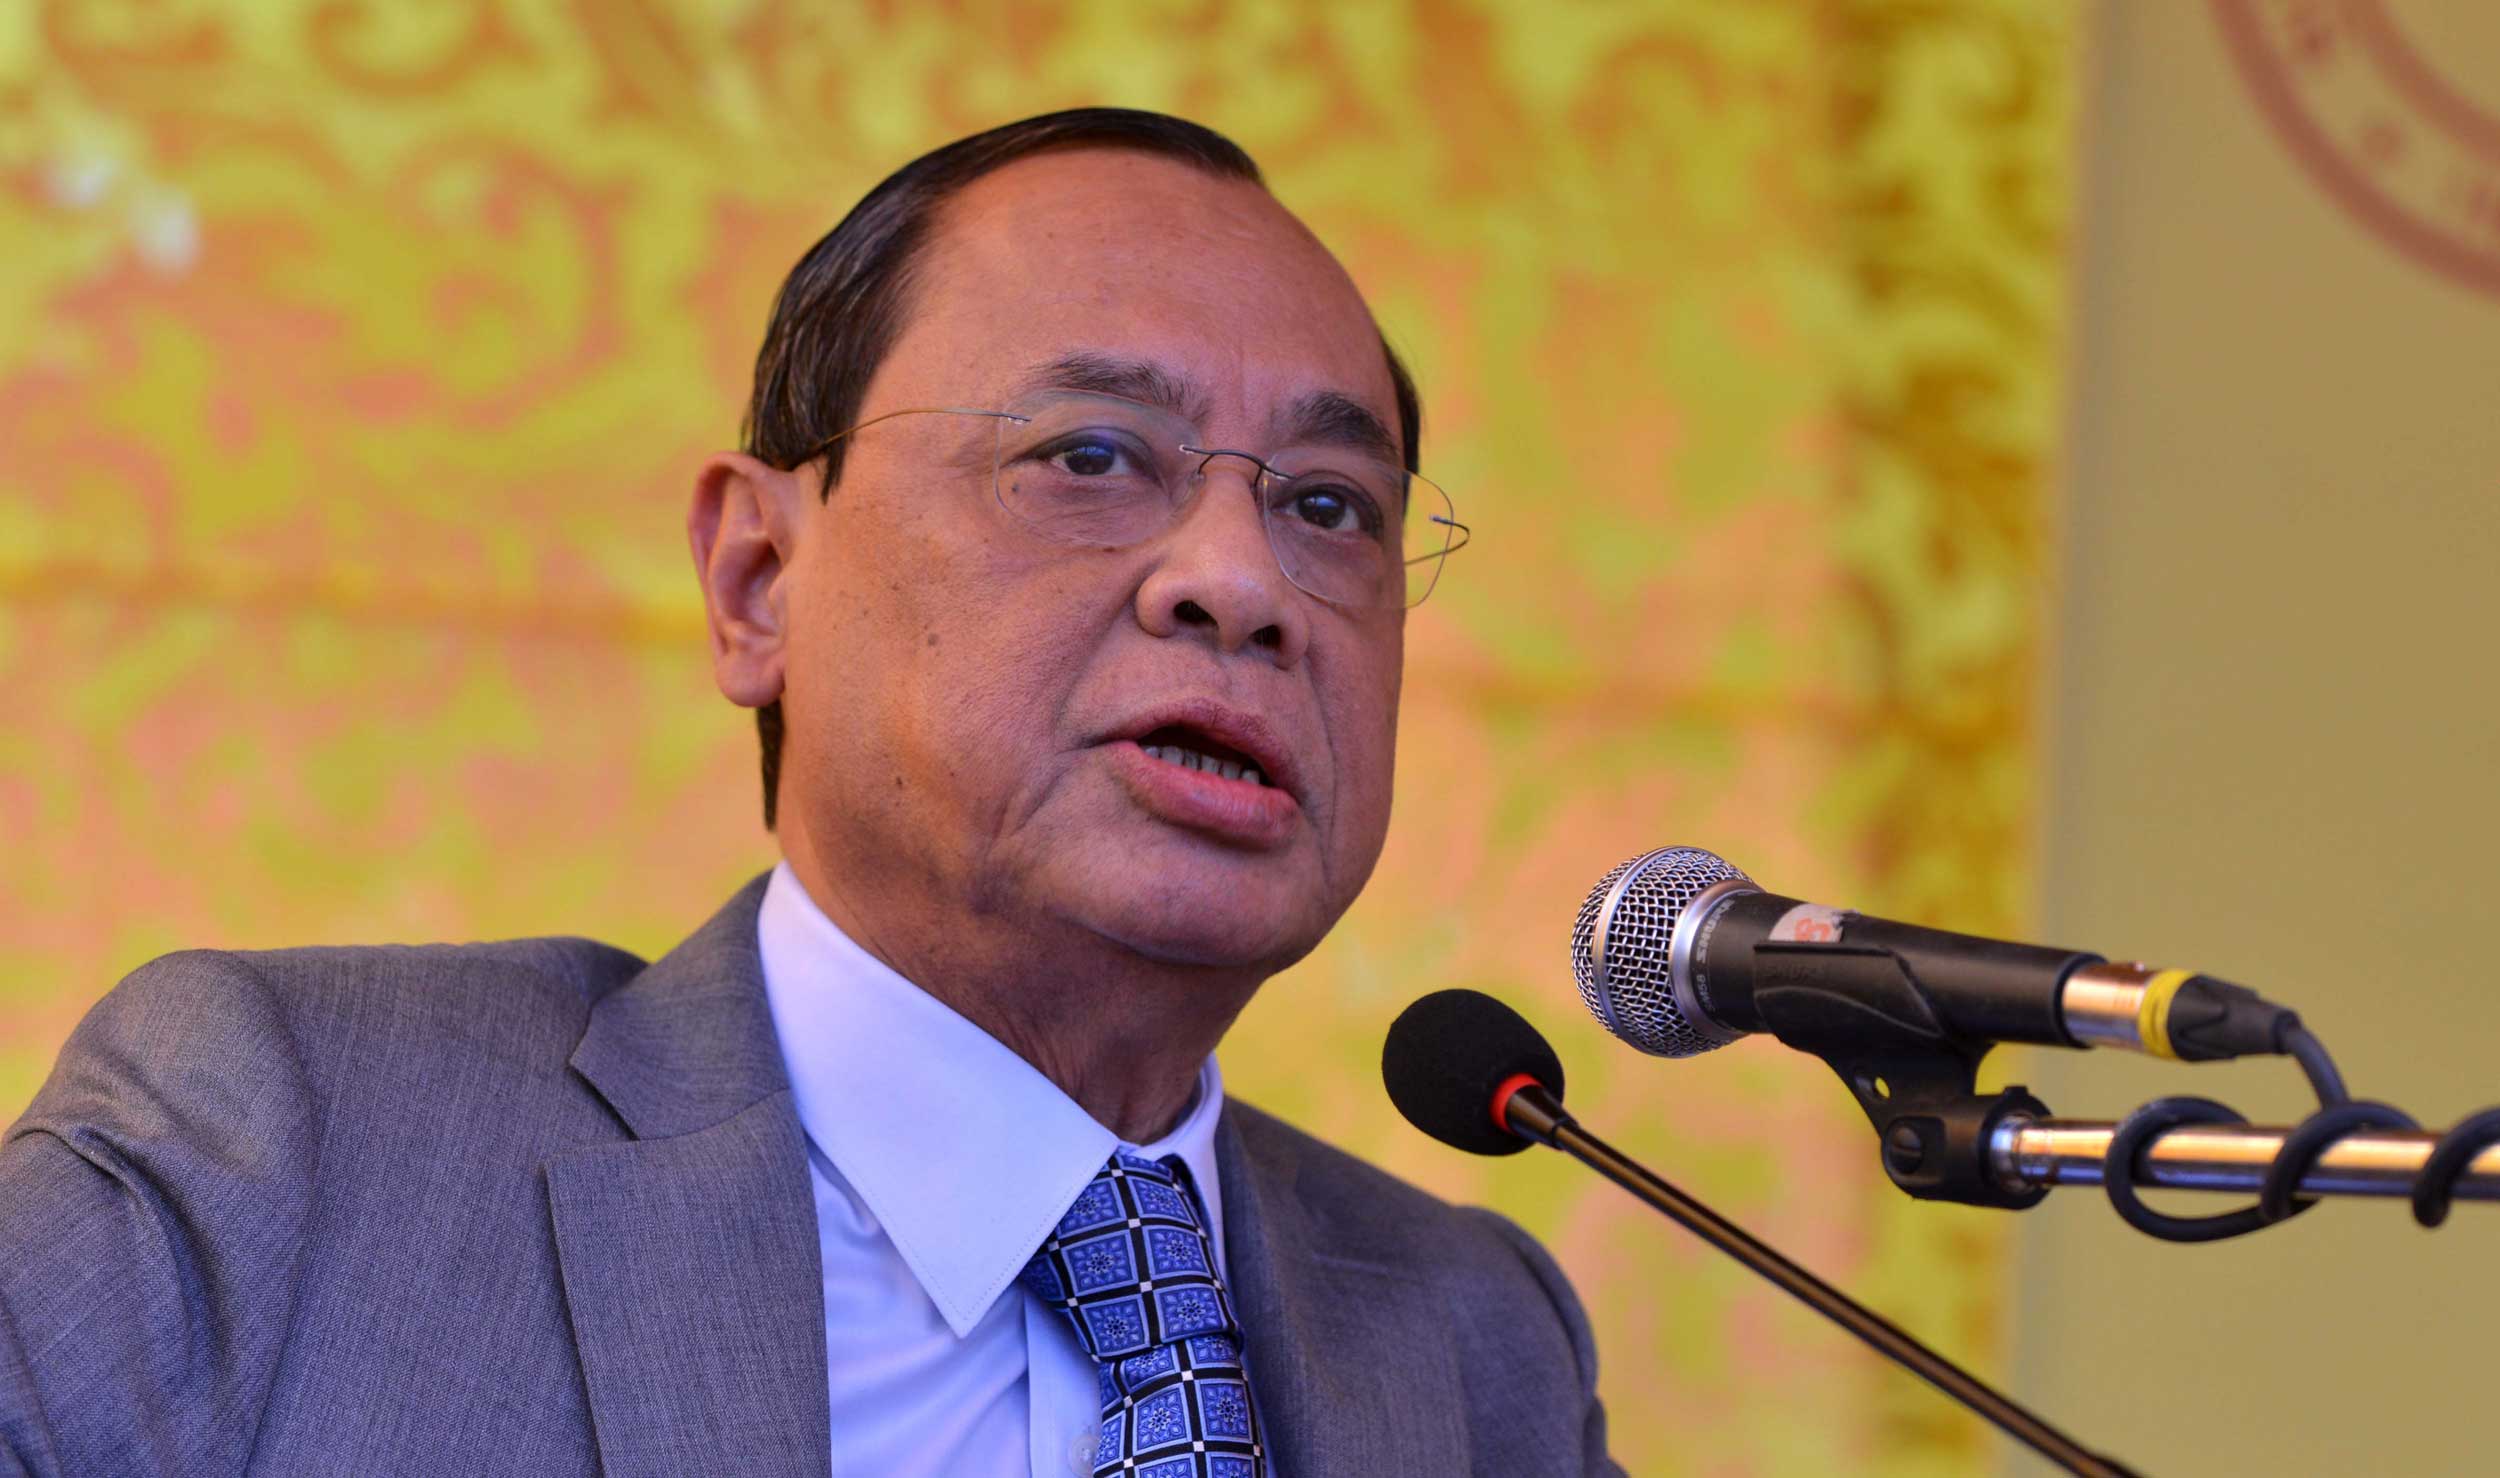 Chief Justice Gogoi 'very upset' about leaks of collegium issues